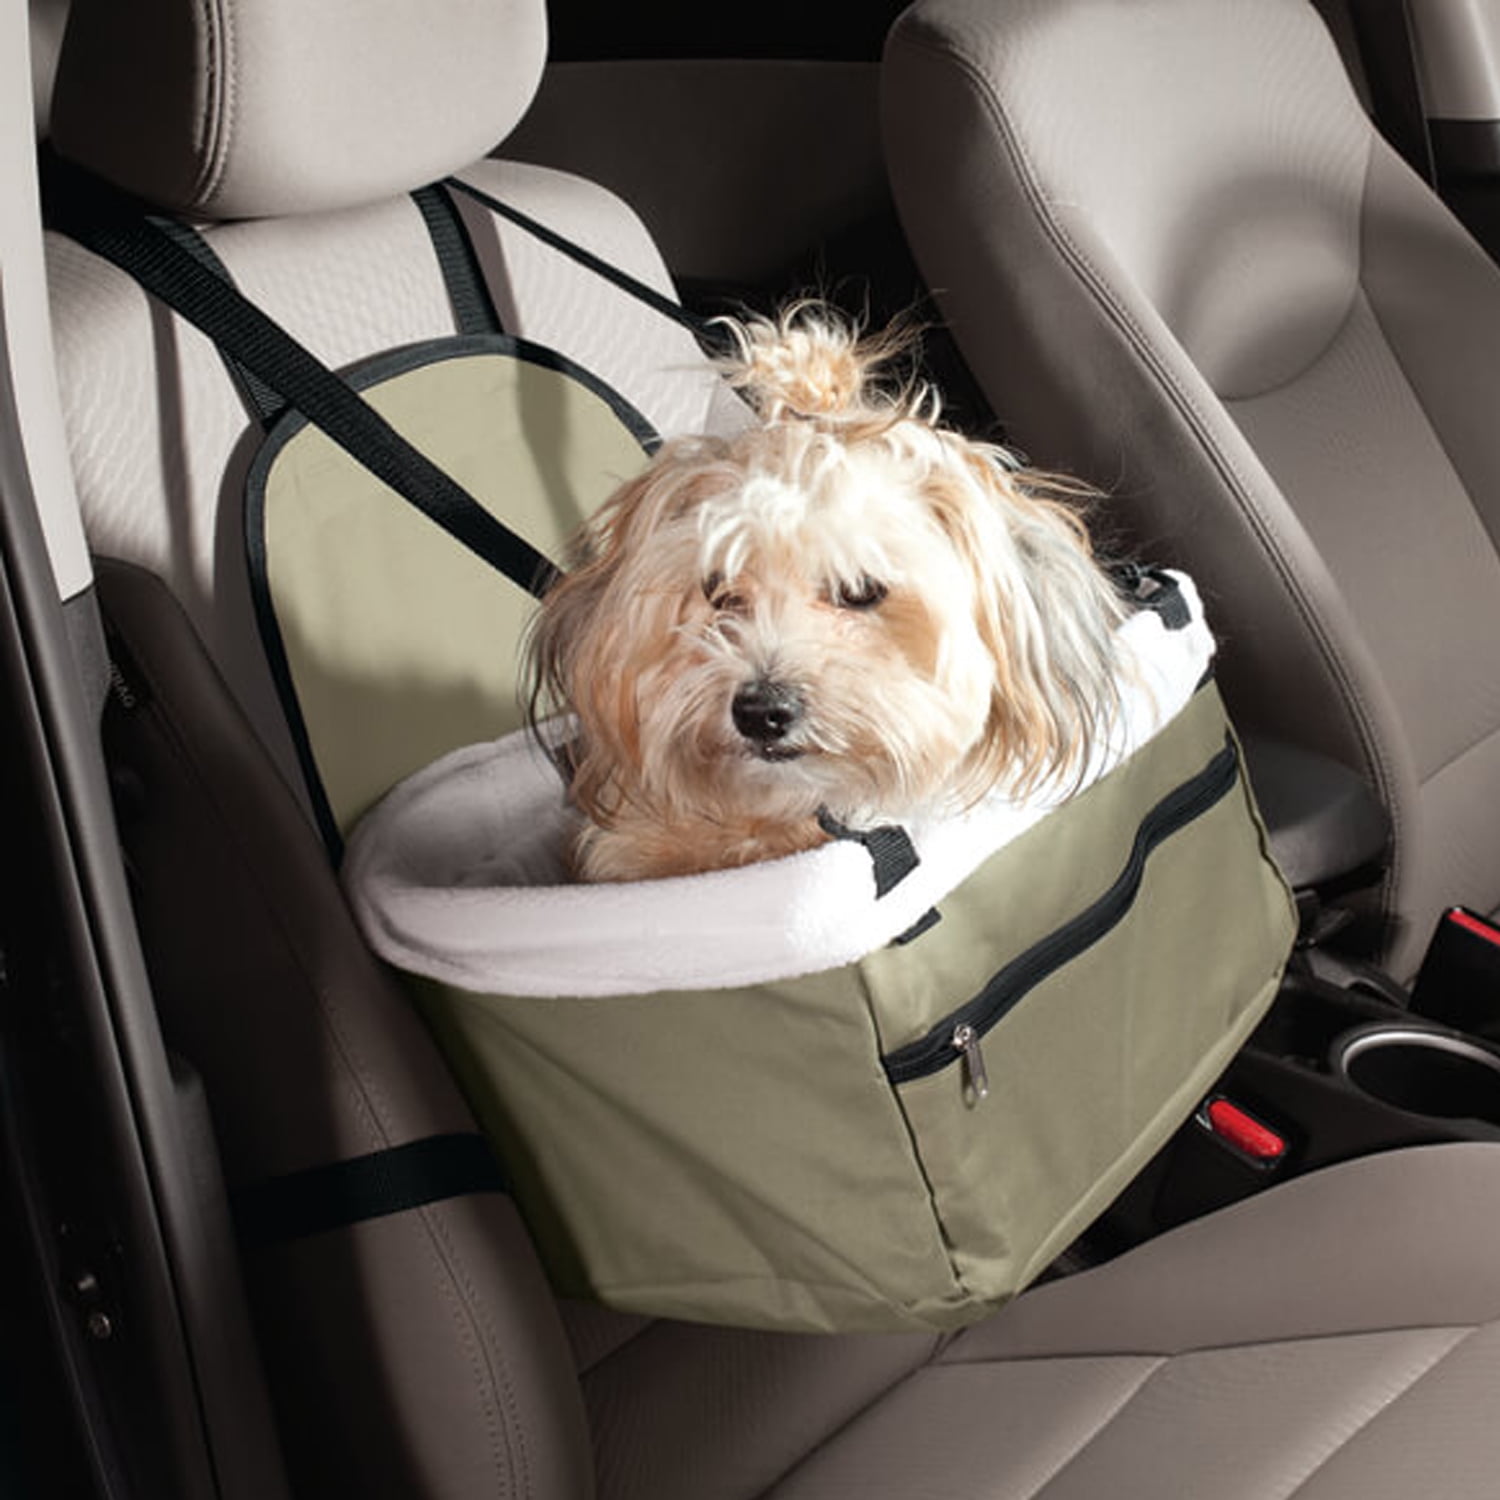 ELEGX Car Back Seat Extender for Large Dogs up to 200lbs,Dog Car Back &  Front Seat Extender with Storage,Pets Can to Have The Whole Front/Back Seat  to Stretch Out and Nap On